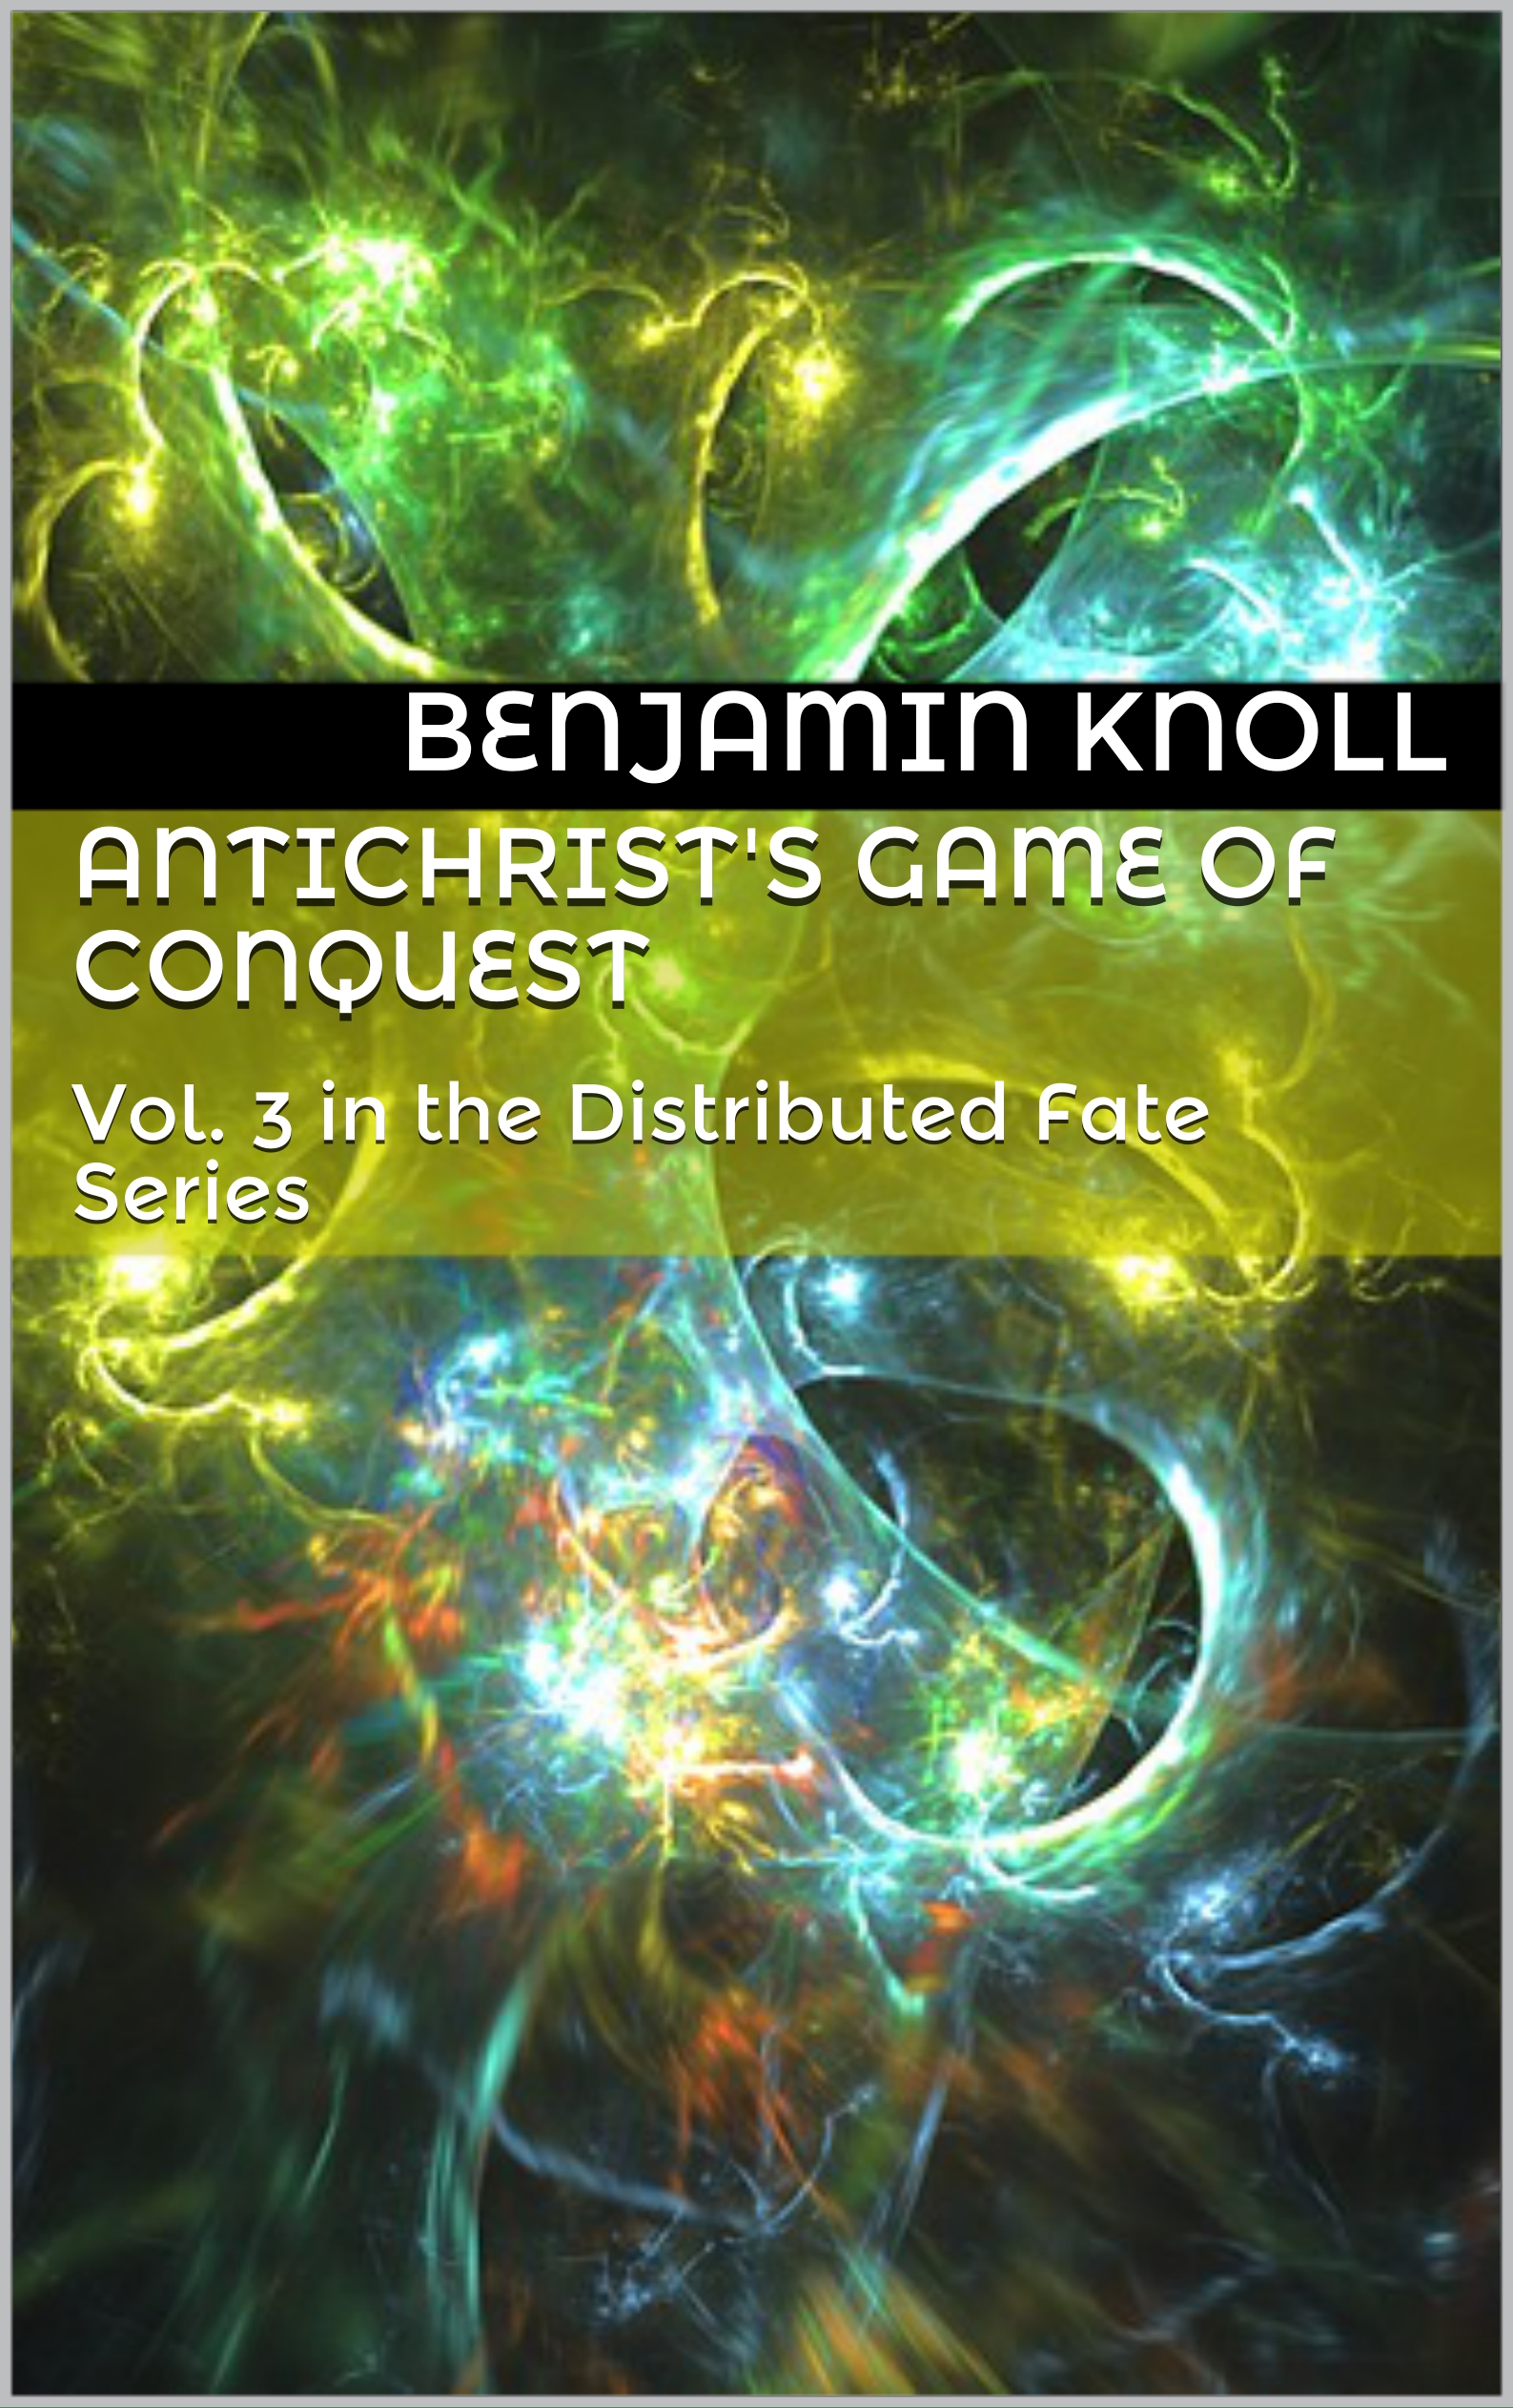 FREE: Antichrist’s Game of Conquest by Benjamin Knoll